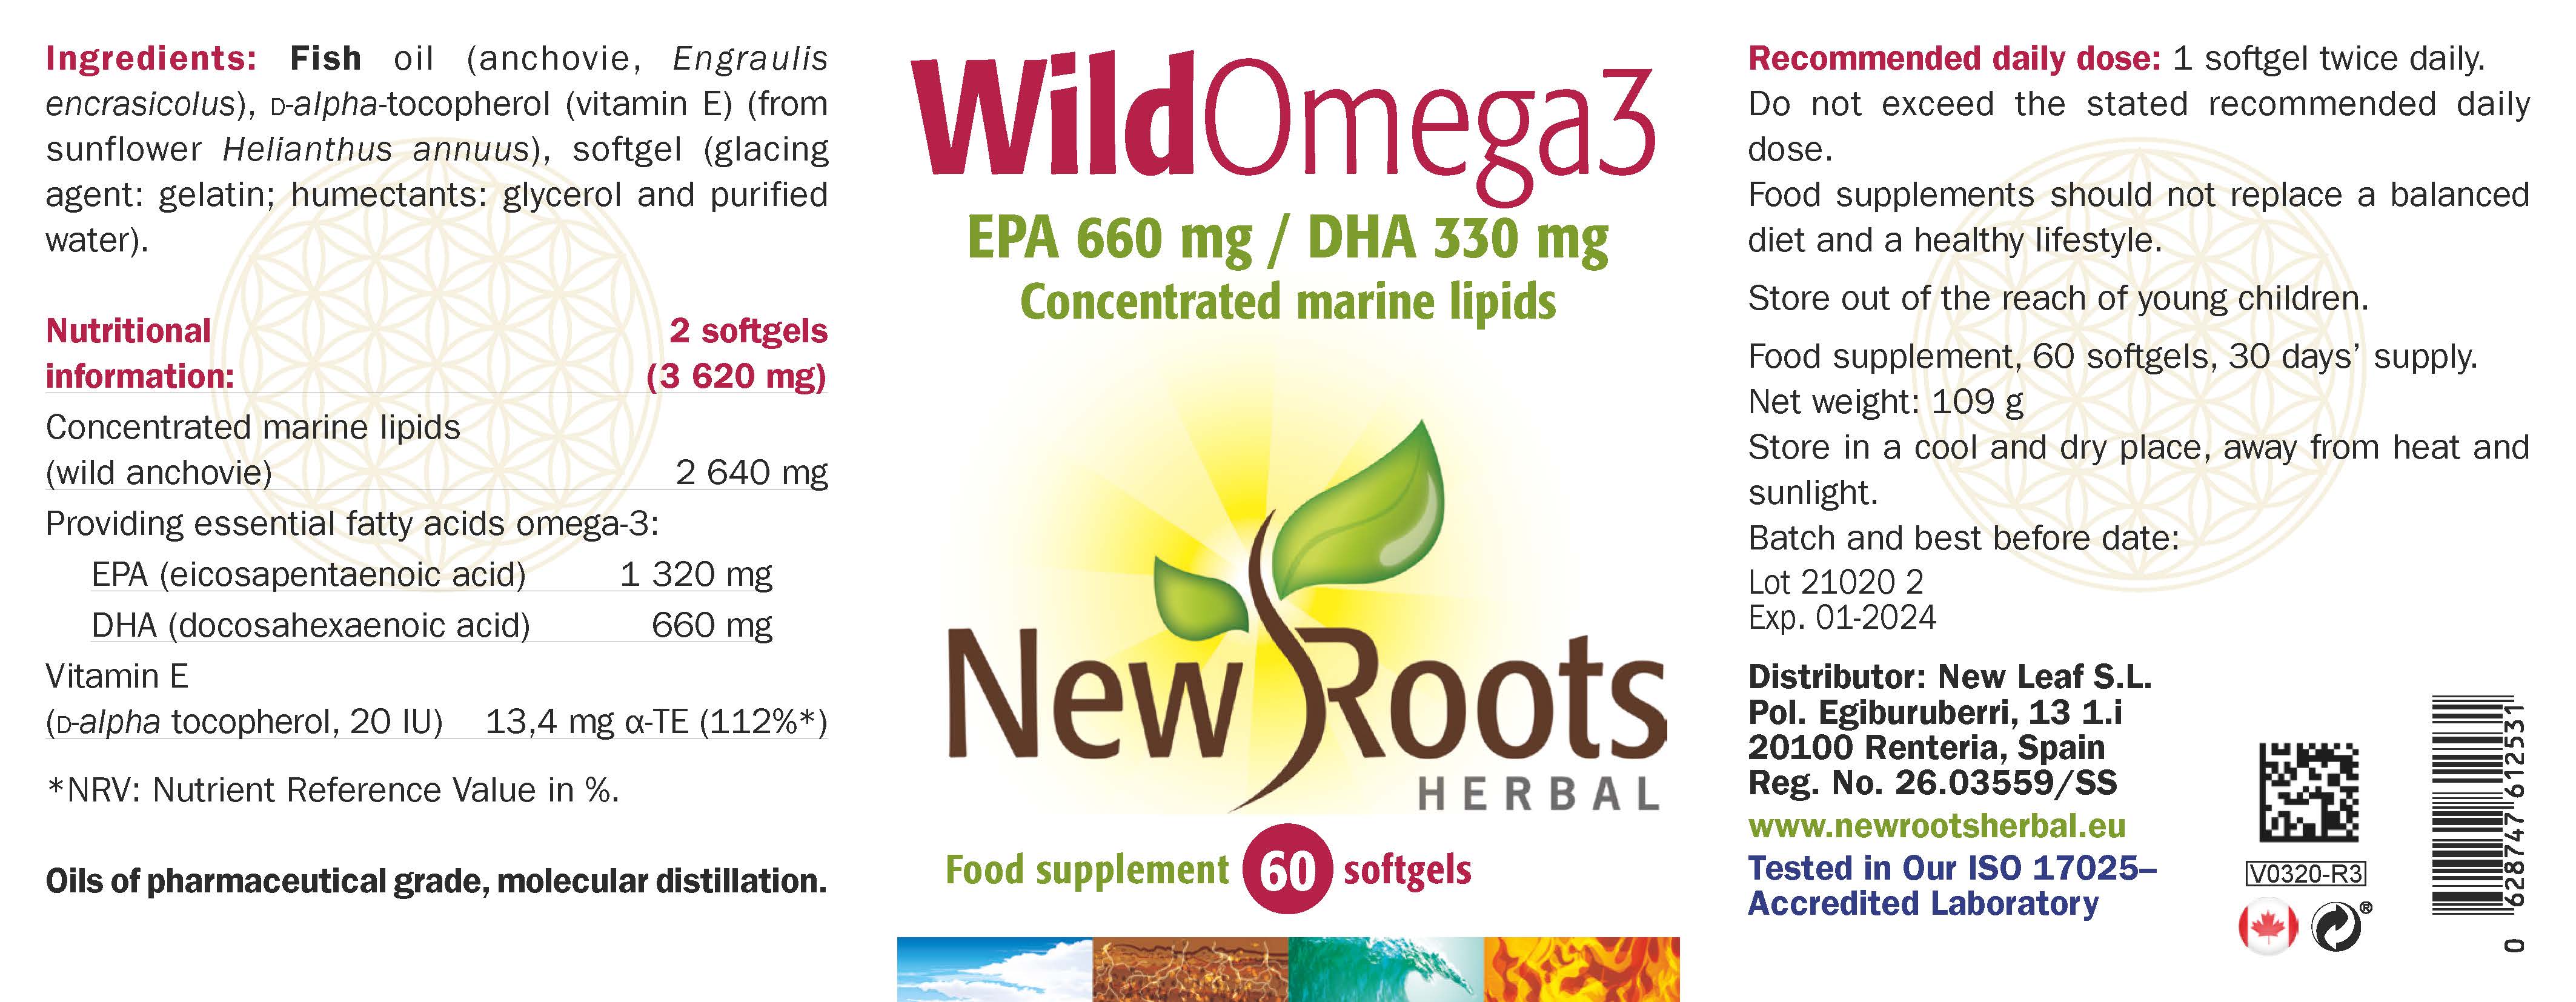 New Roots Herbal Wild Omega-3 60's